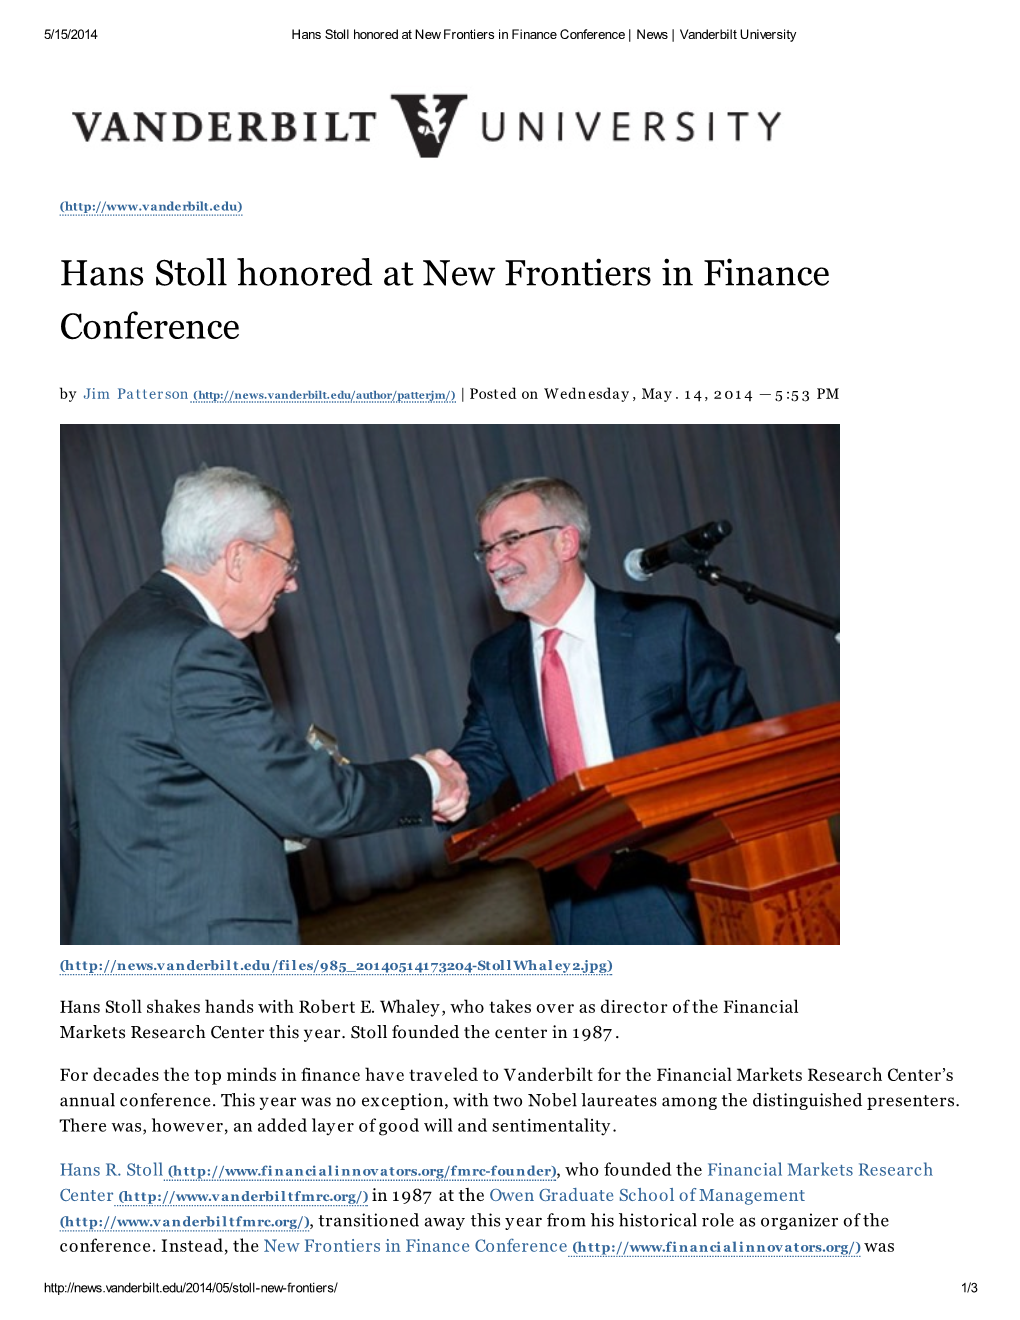 Hans Stoll Honored at New Frontiers in Finance Conference | News | Vanderbilt University